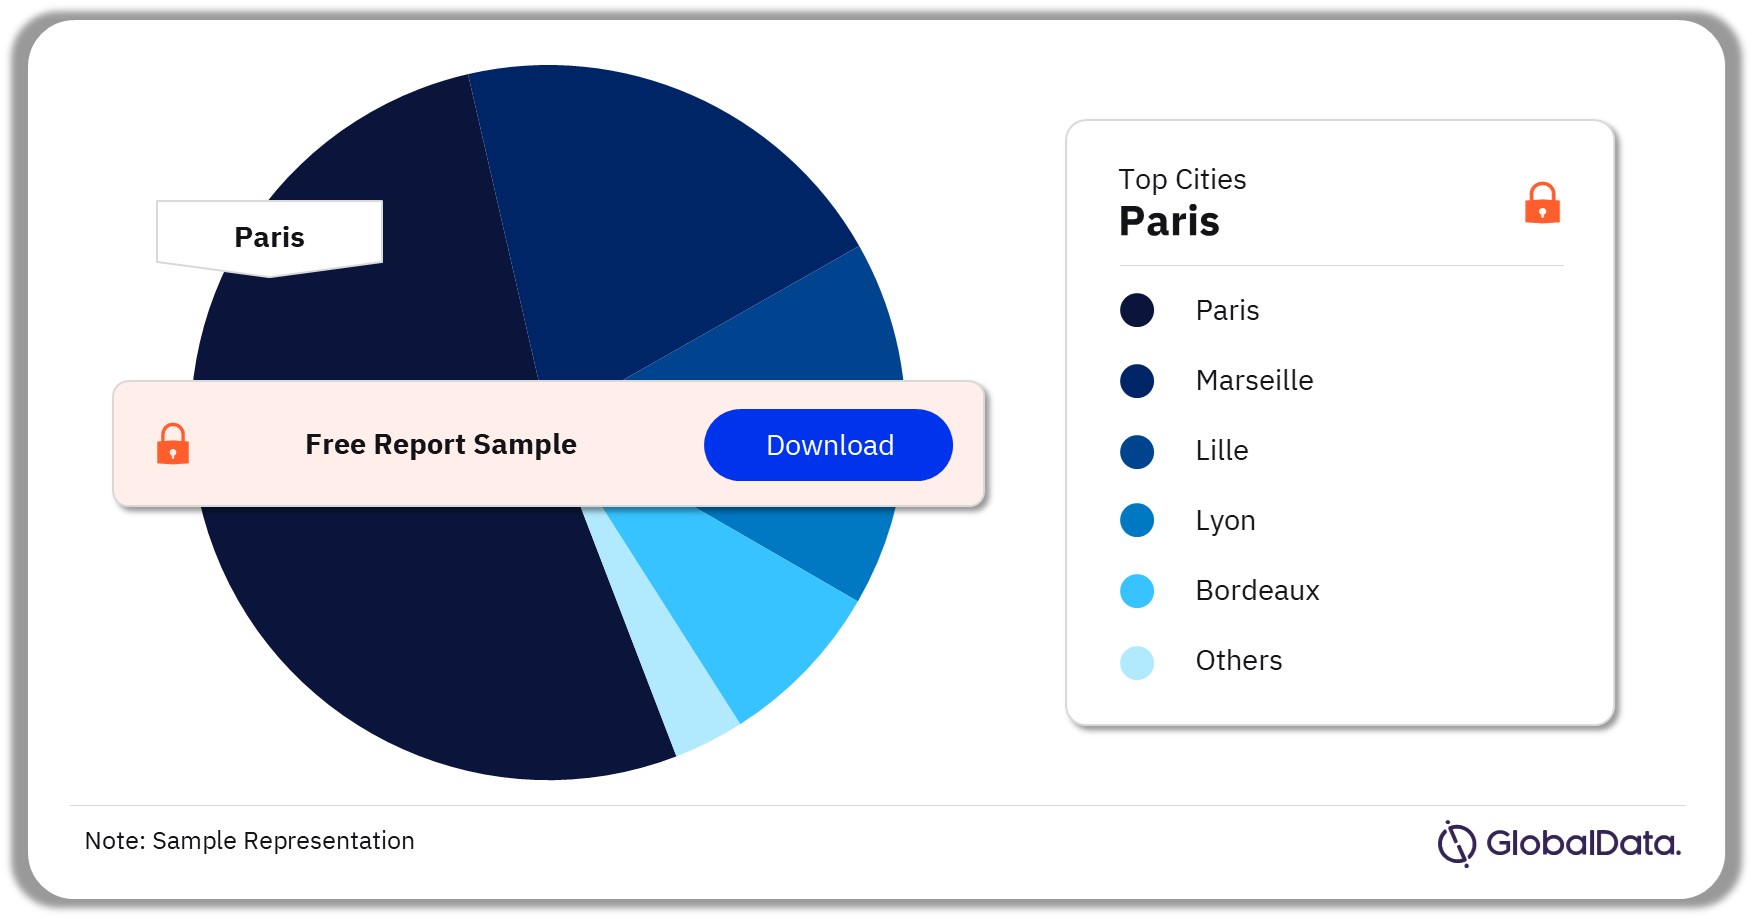 France Make-up Market Analysis, by Top Cities, 2021 (%)